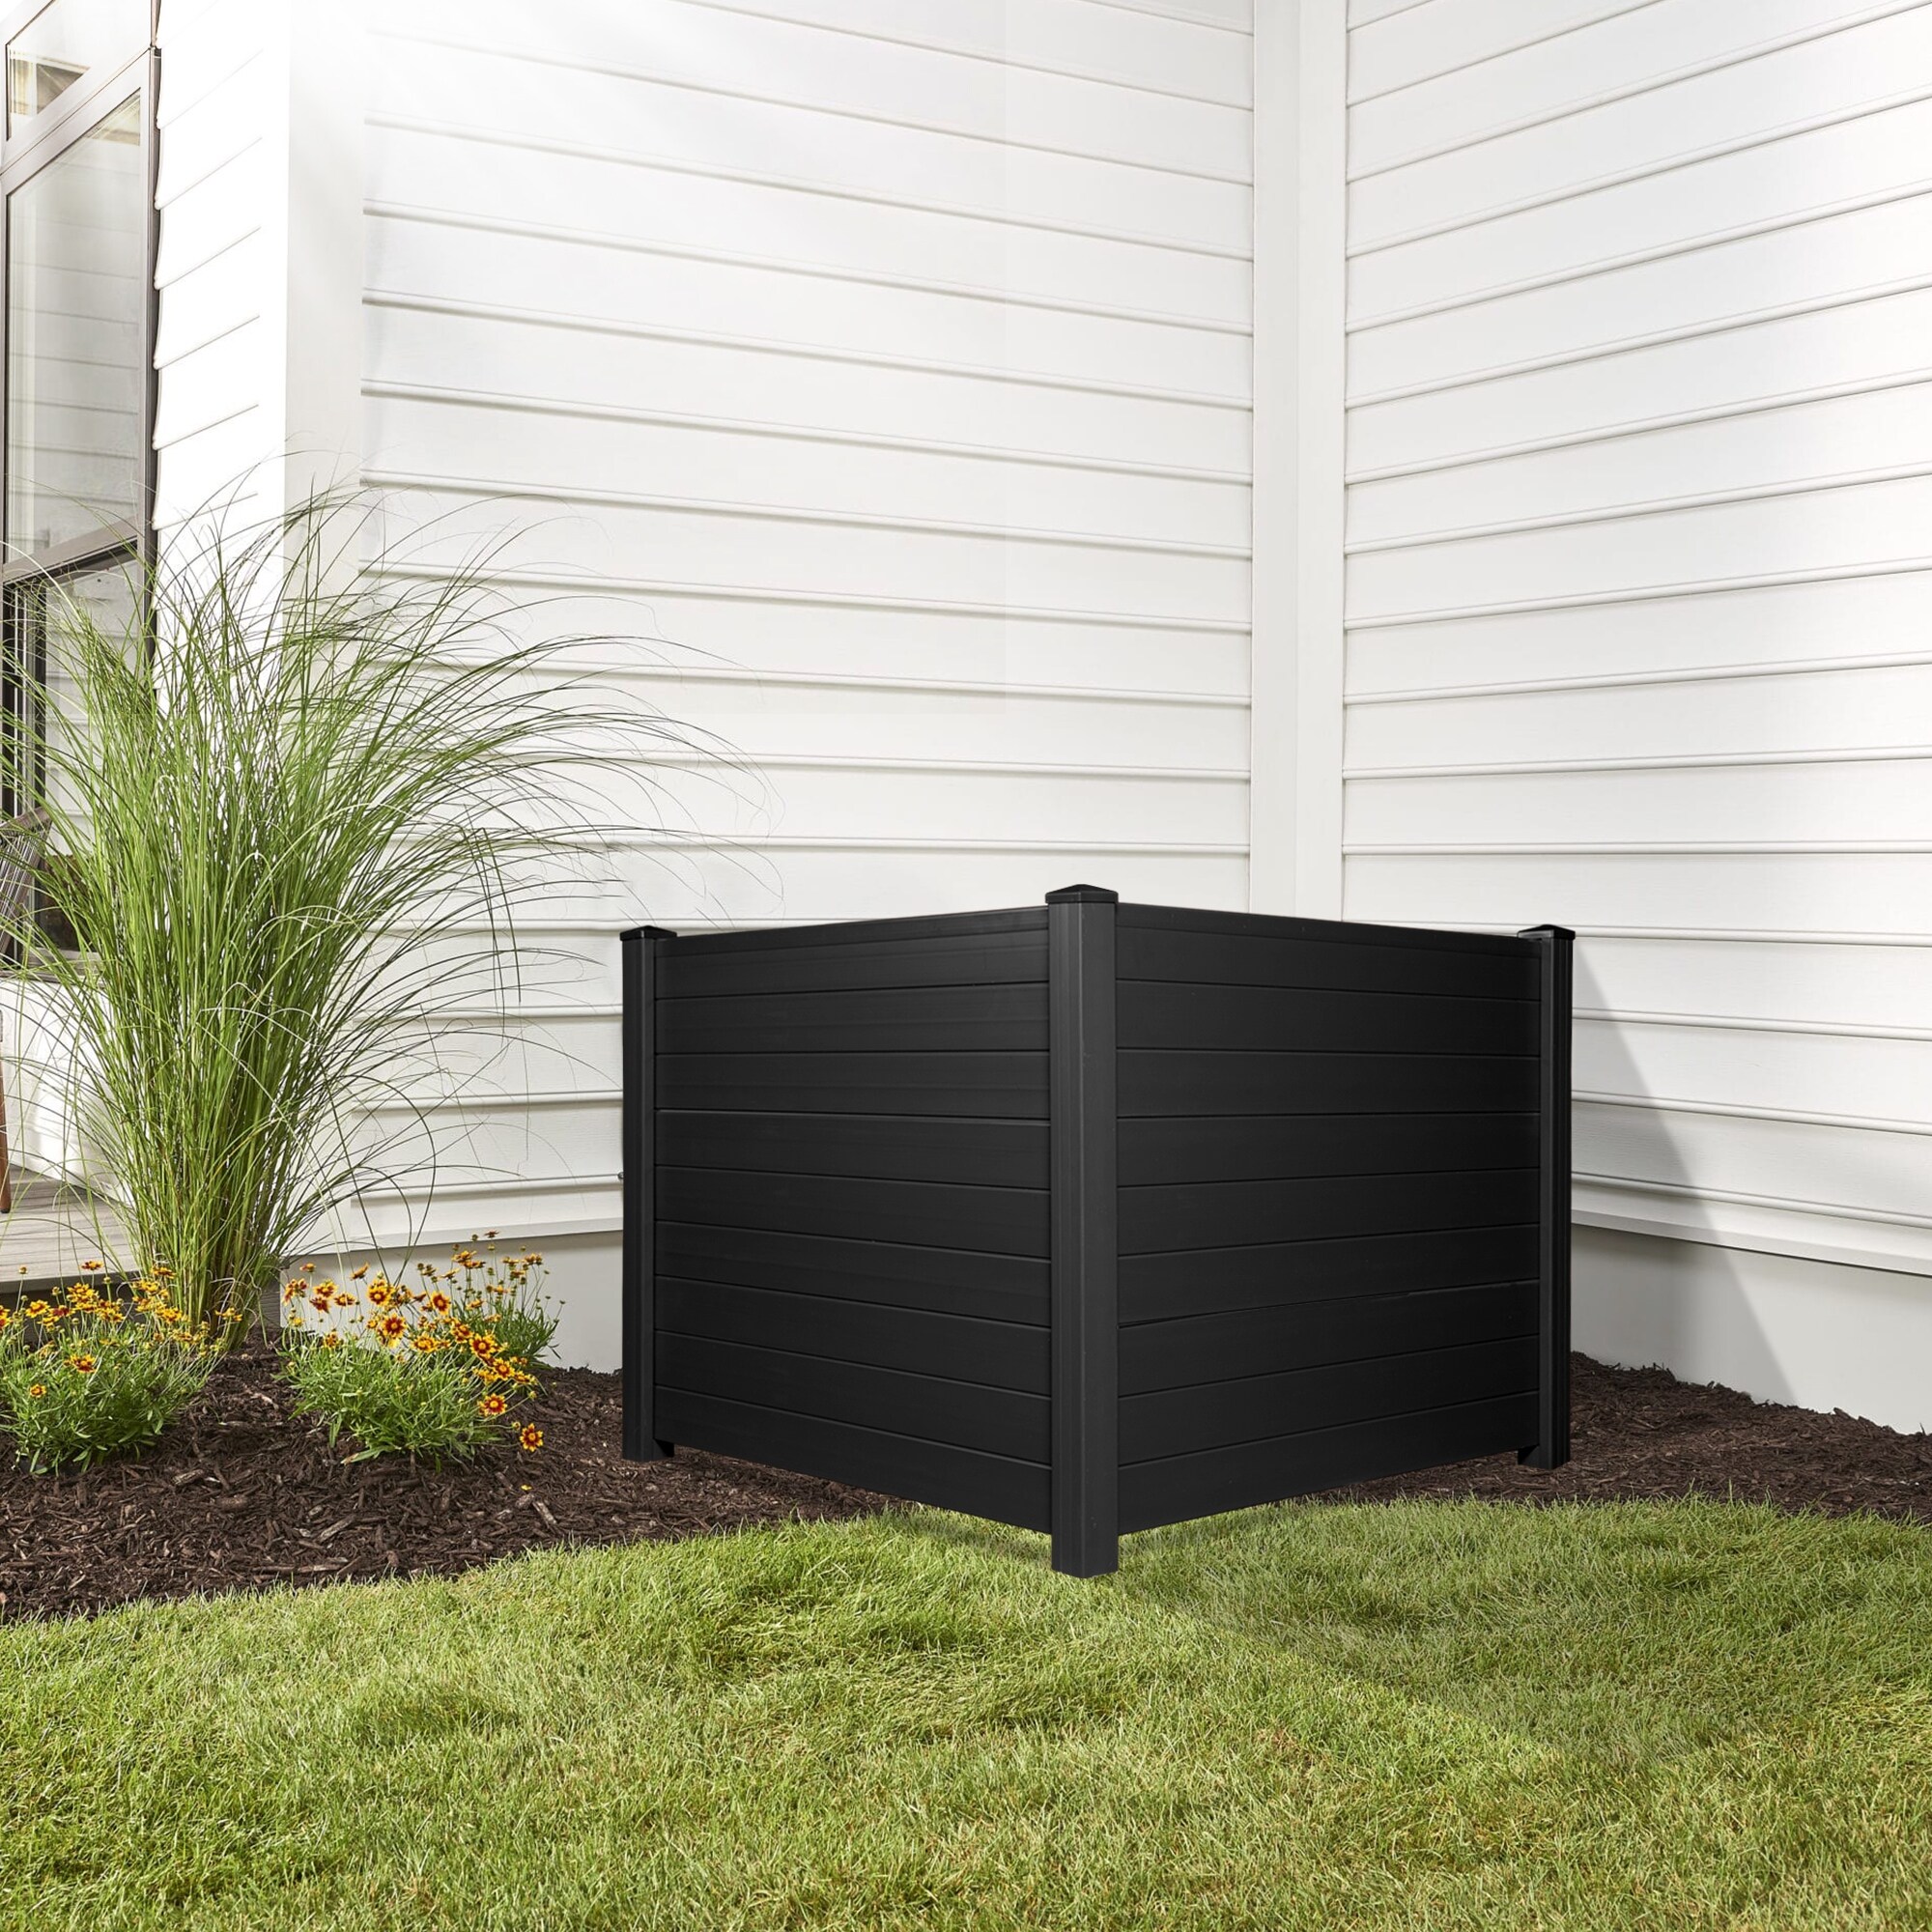 https://ak1.ostkcdn.com/images/products/is/images/direct/2d2c0a0deed37ee6390a982dcc4cb2f28ffb8b44/Privacy-Screen-Outdoor-Privacy-Fence-Panels-for-Air-Conditioner-and-Trash-Can-%282-Panels-White%29.jpg